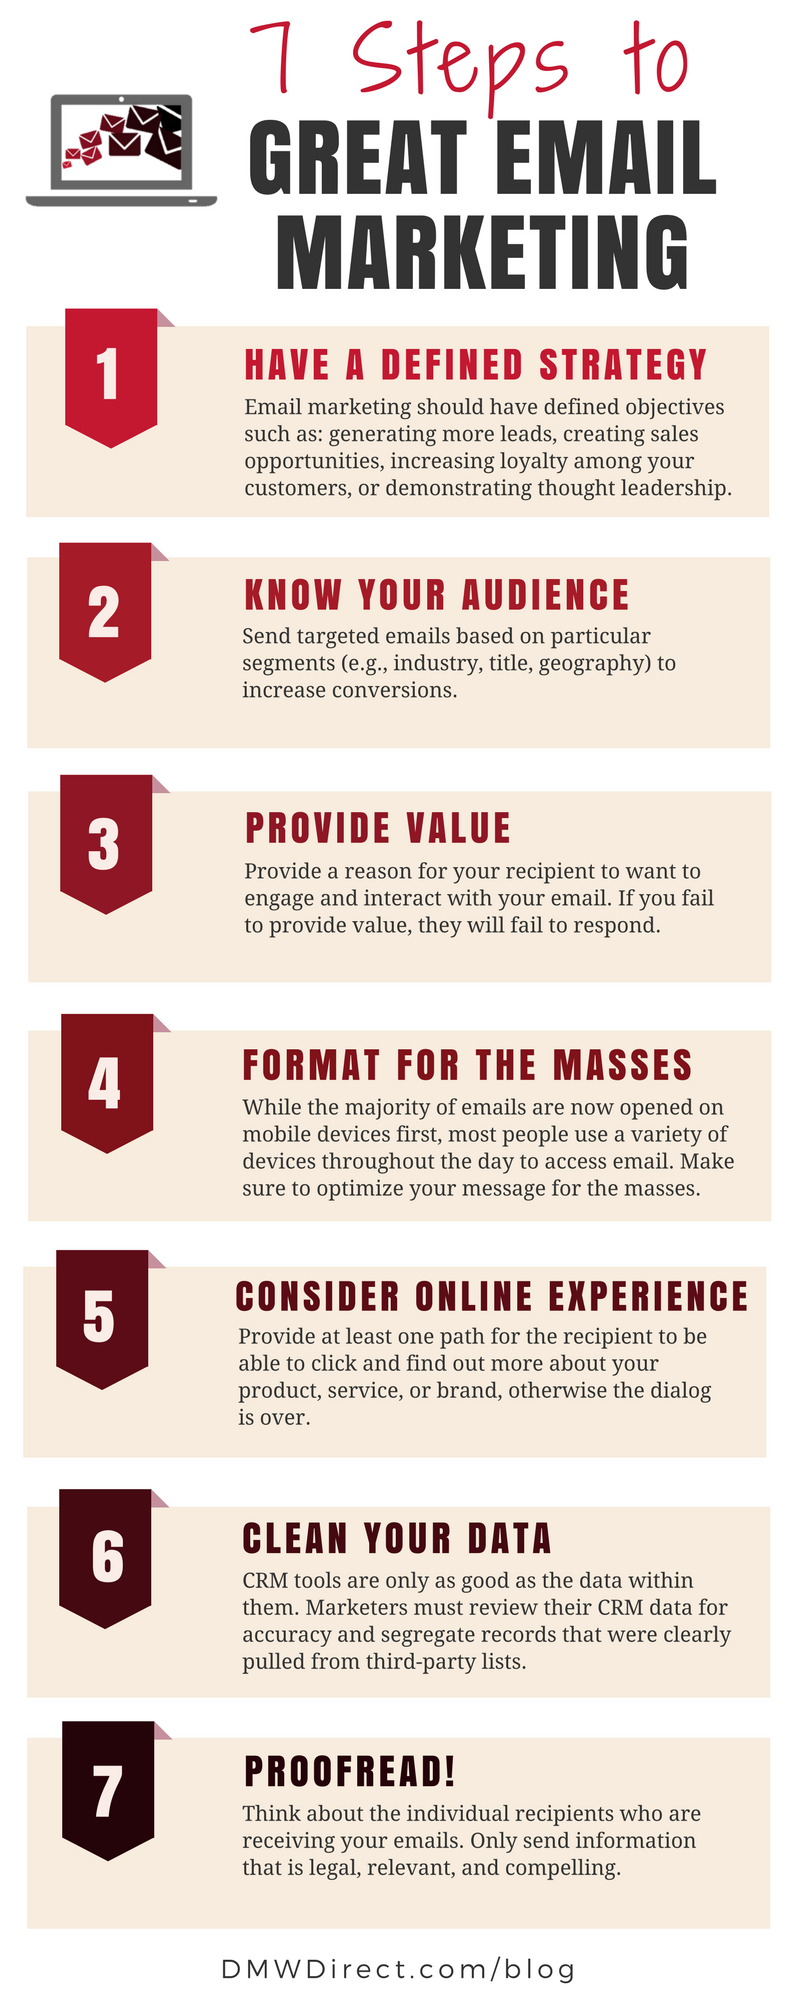 7 steps to great email marketing infographic